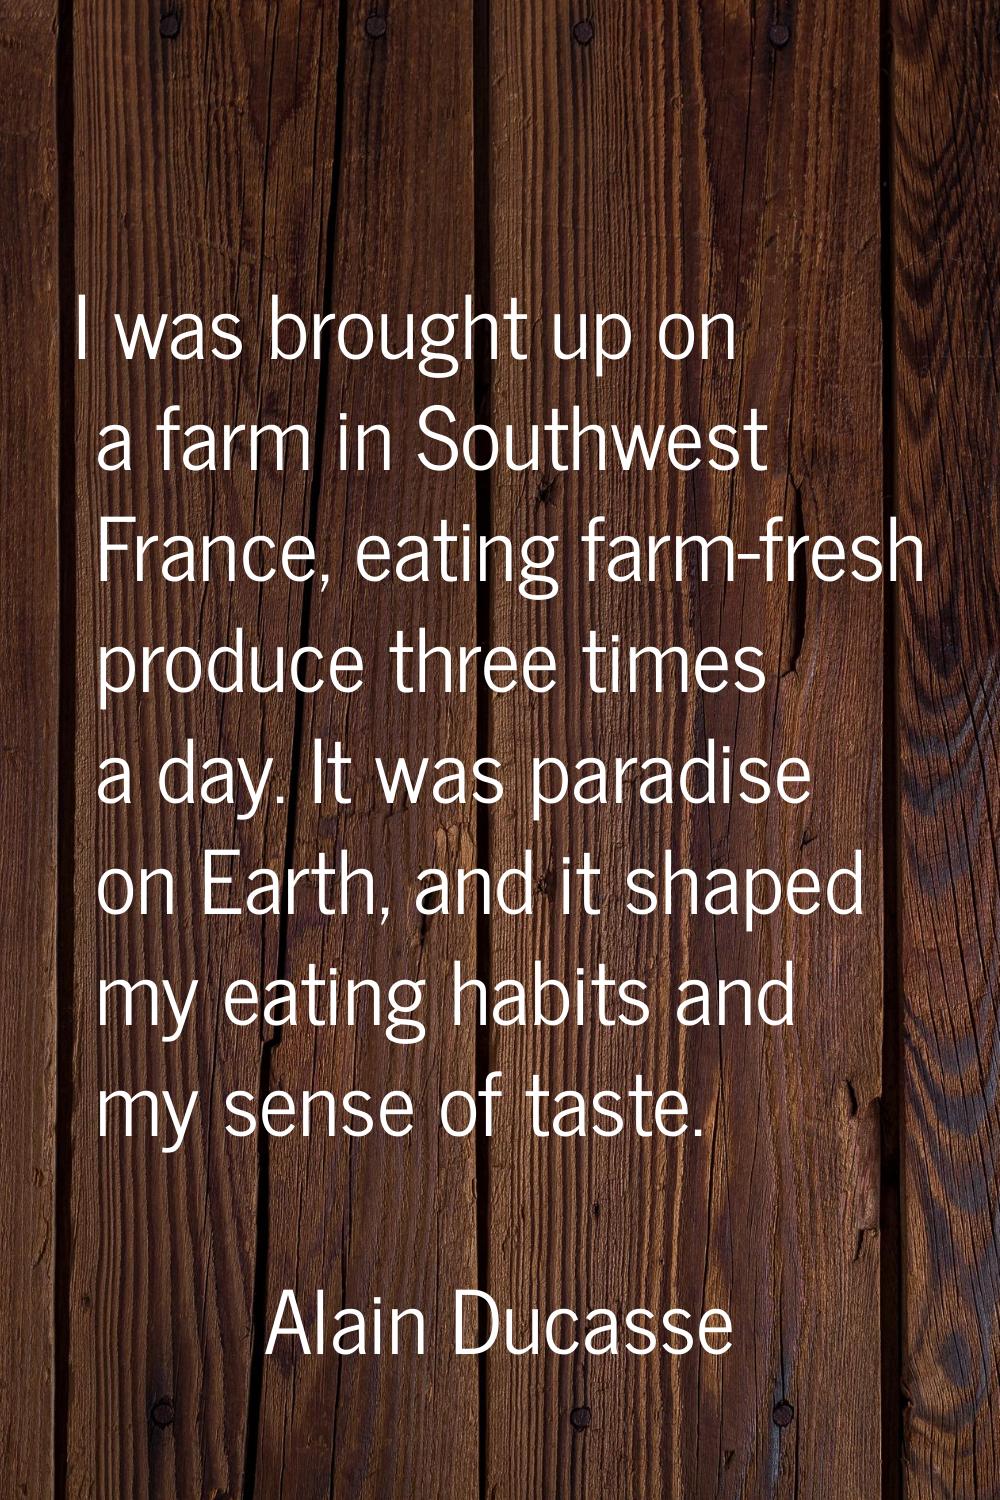 I was brought up on a farm in Southwest France, eating farm-fresh produce three times a day. It was